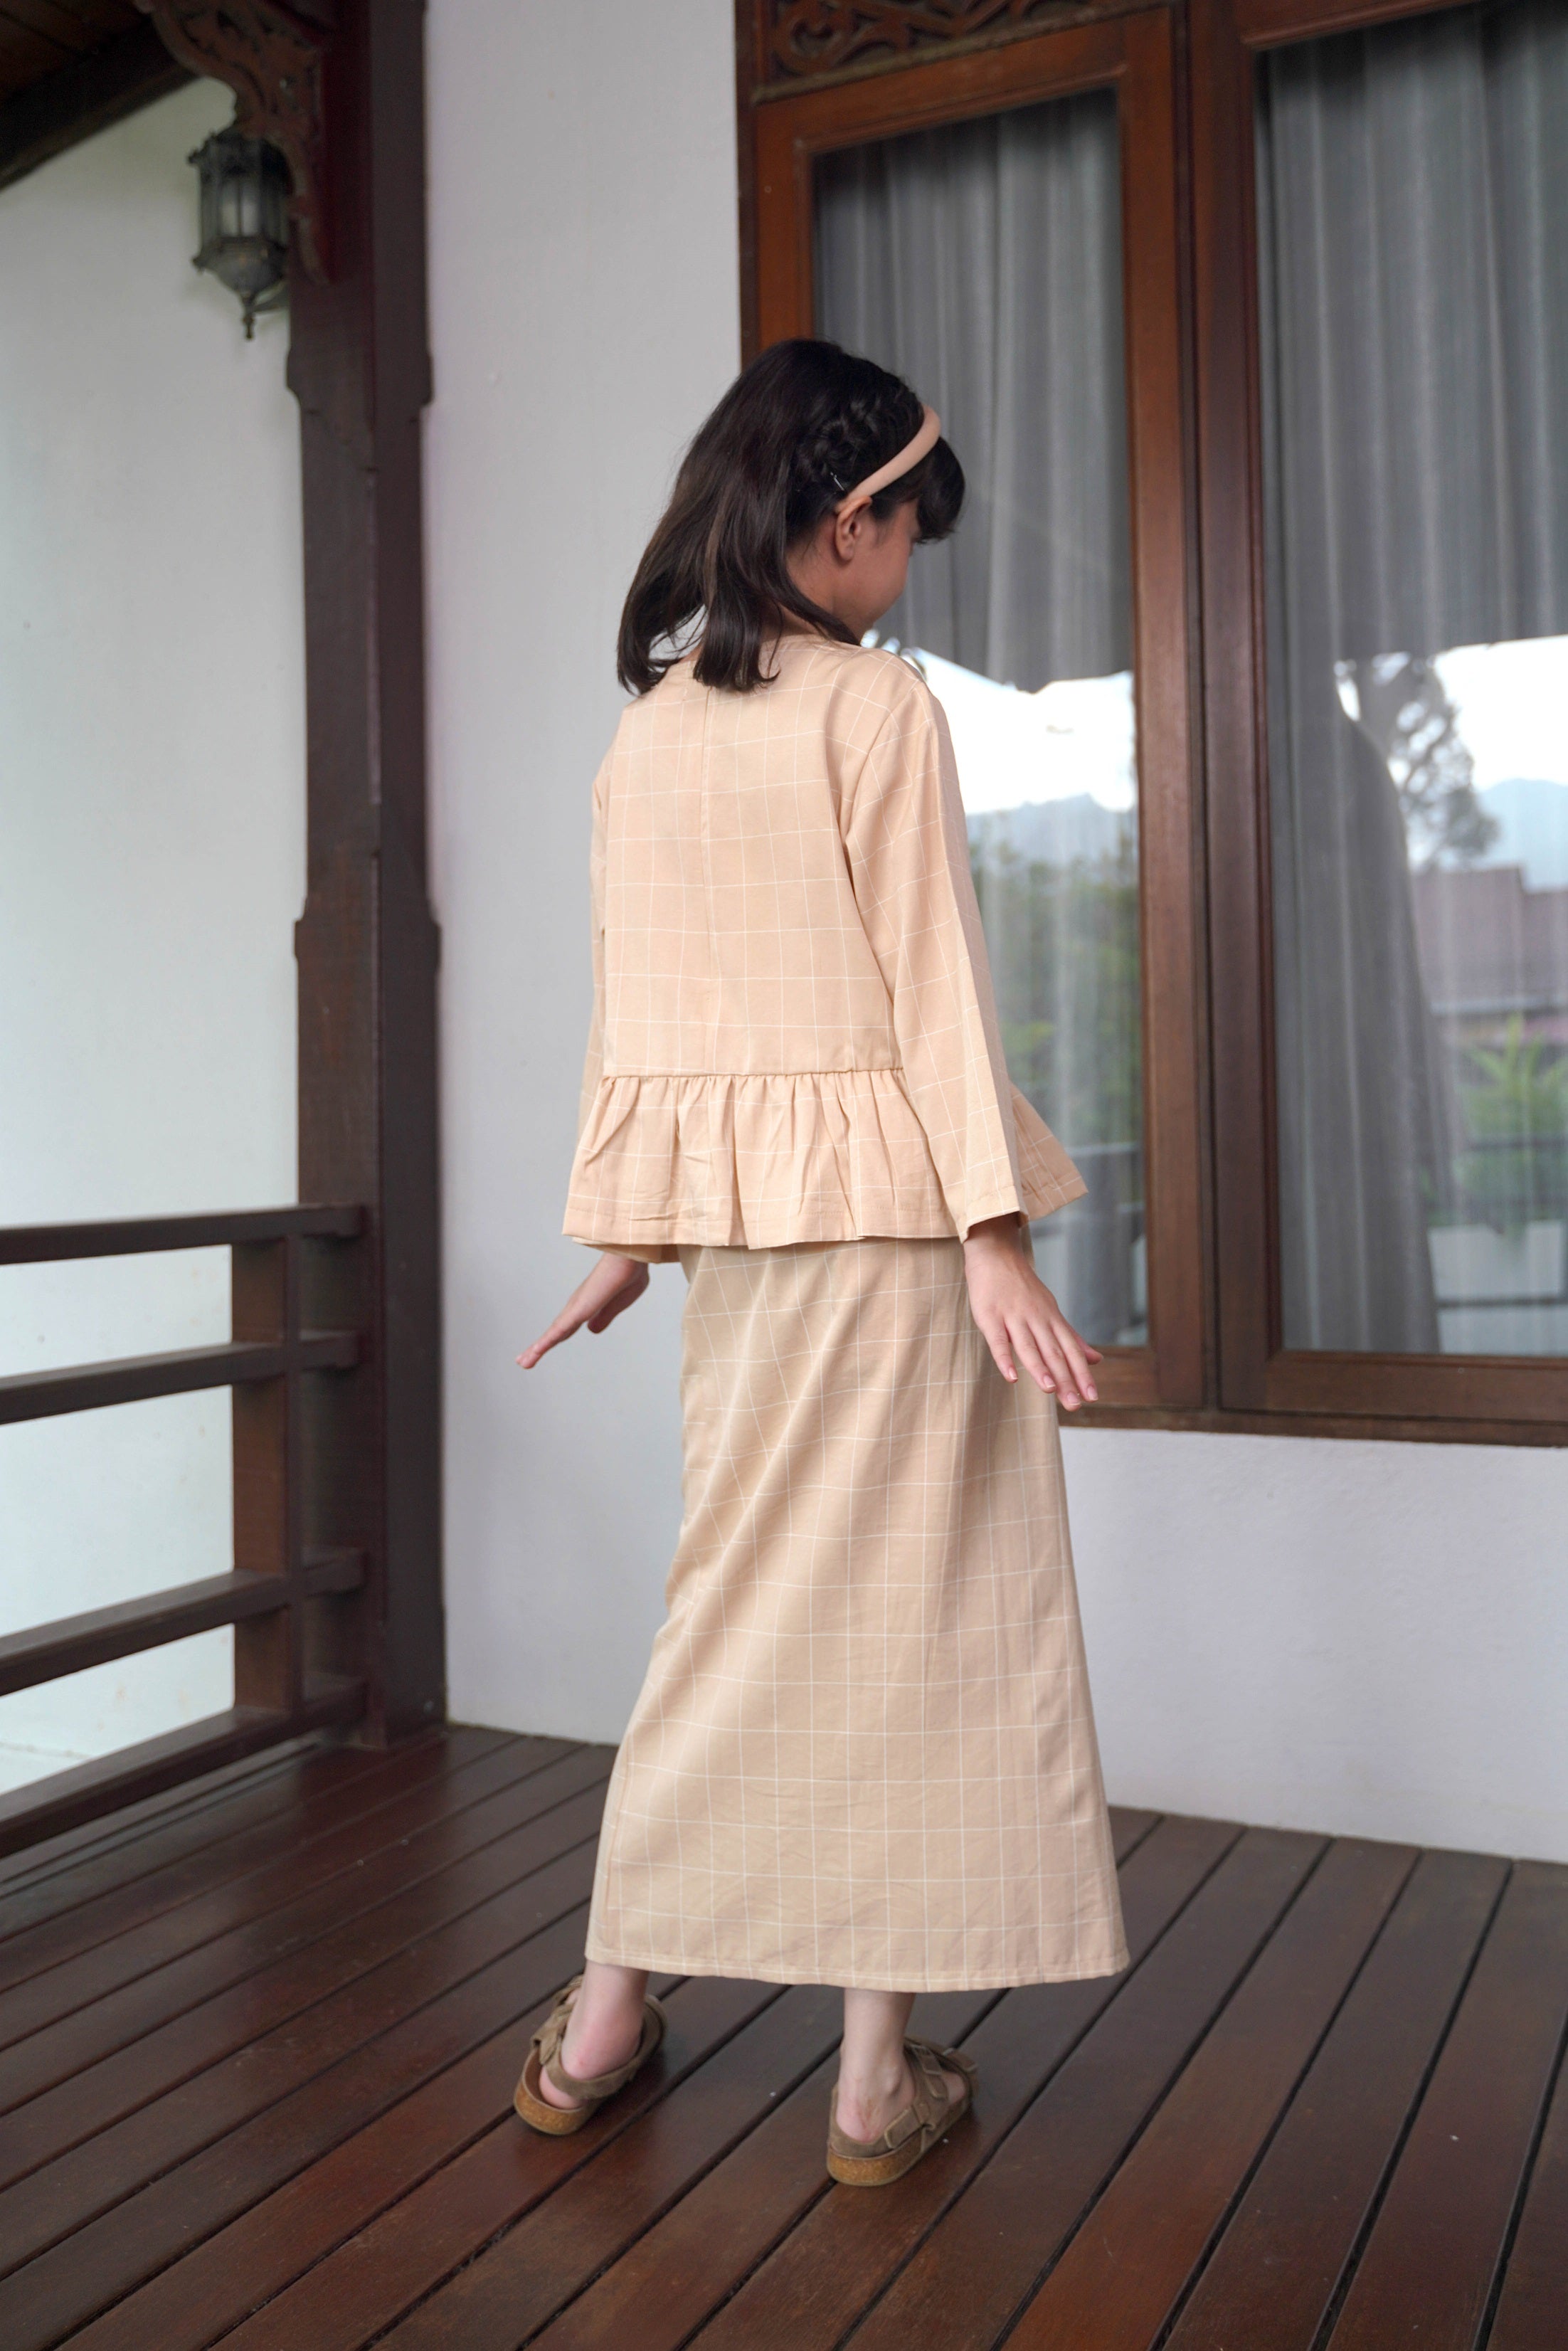 The Nikmat Collection Girl Classic Skirt Checked Caramel